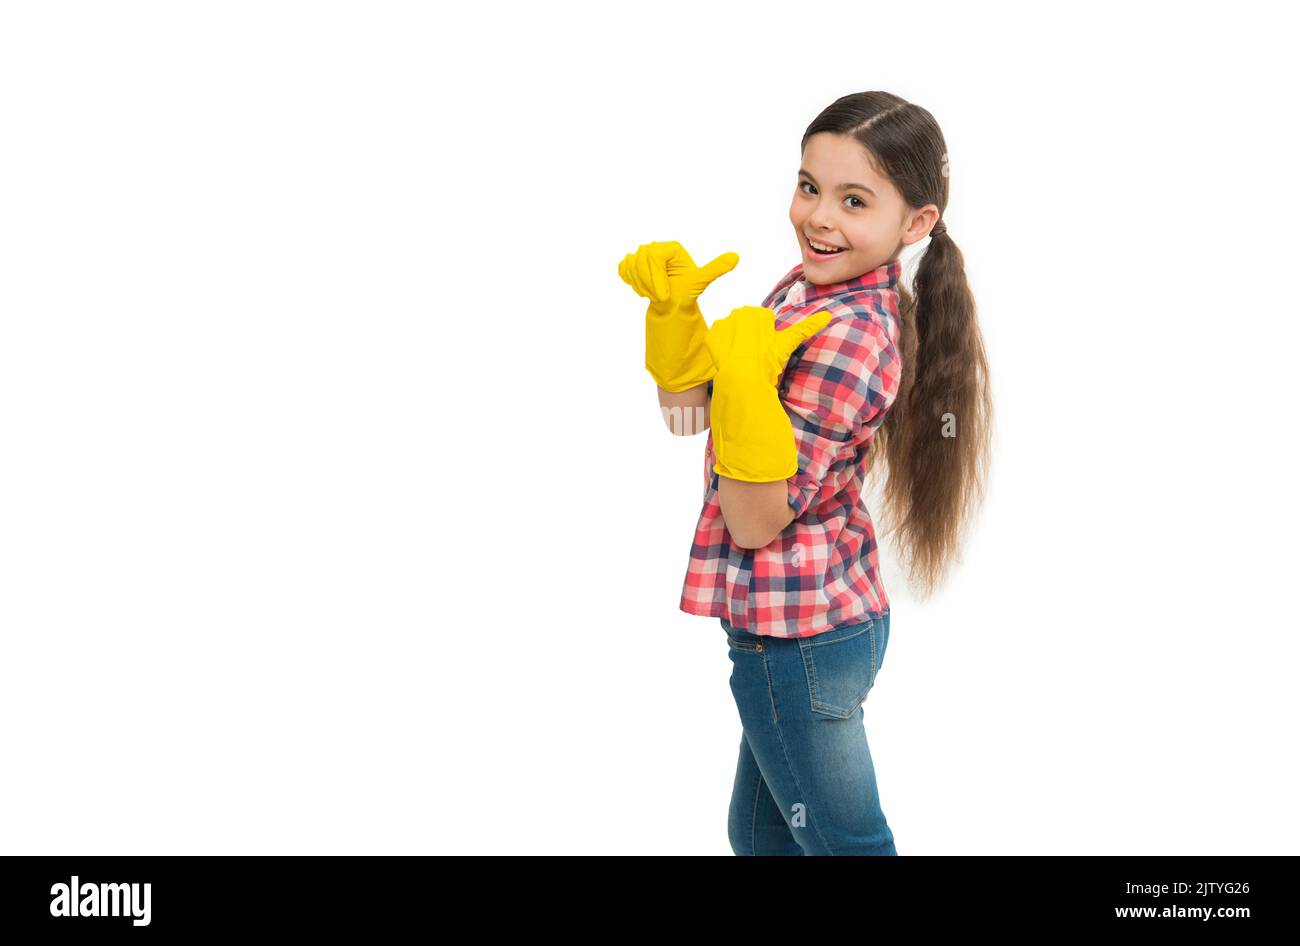 well done. Cleaning supplies advertisement. small girl cleaning in rubber gloves. kid clean house in latex gloves. Yellow gloves for cleaning the hous Stock Photo